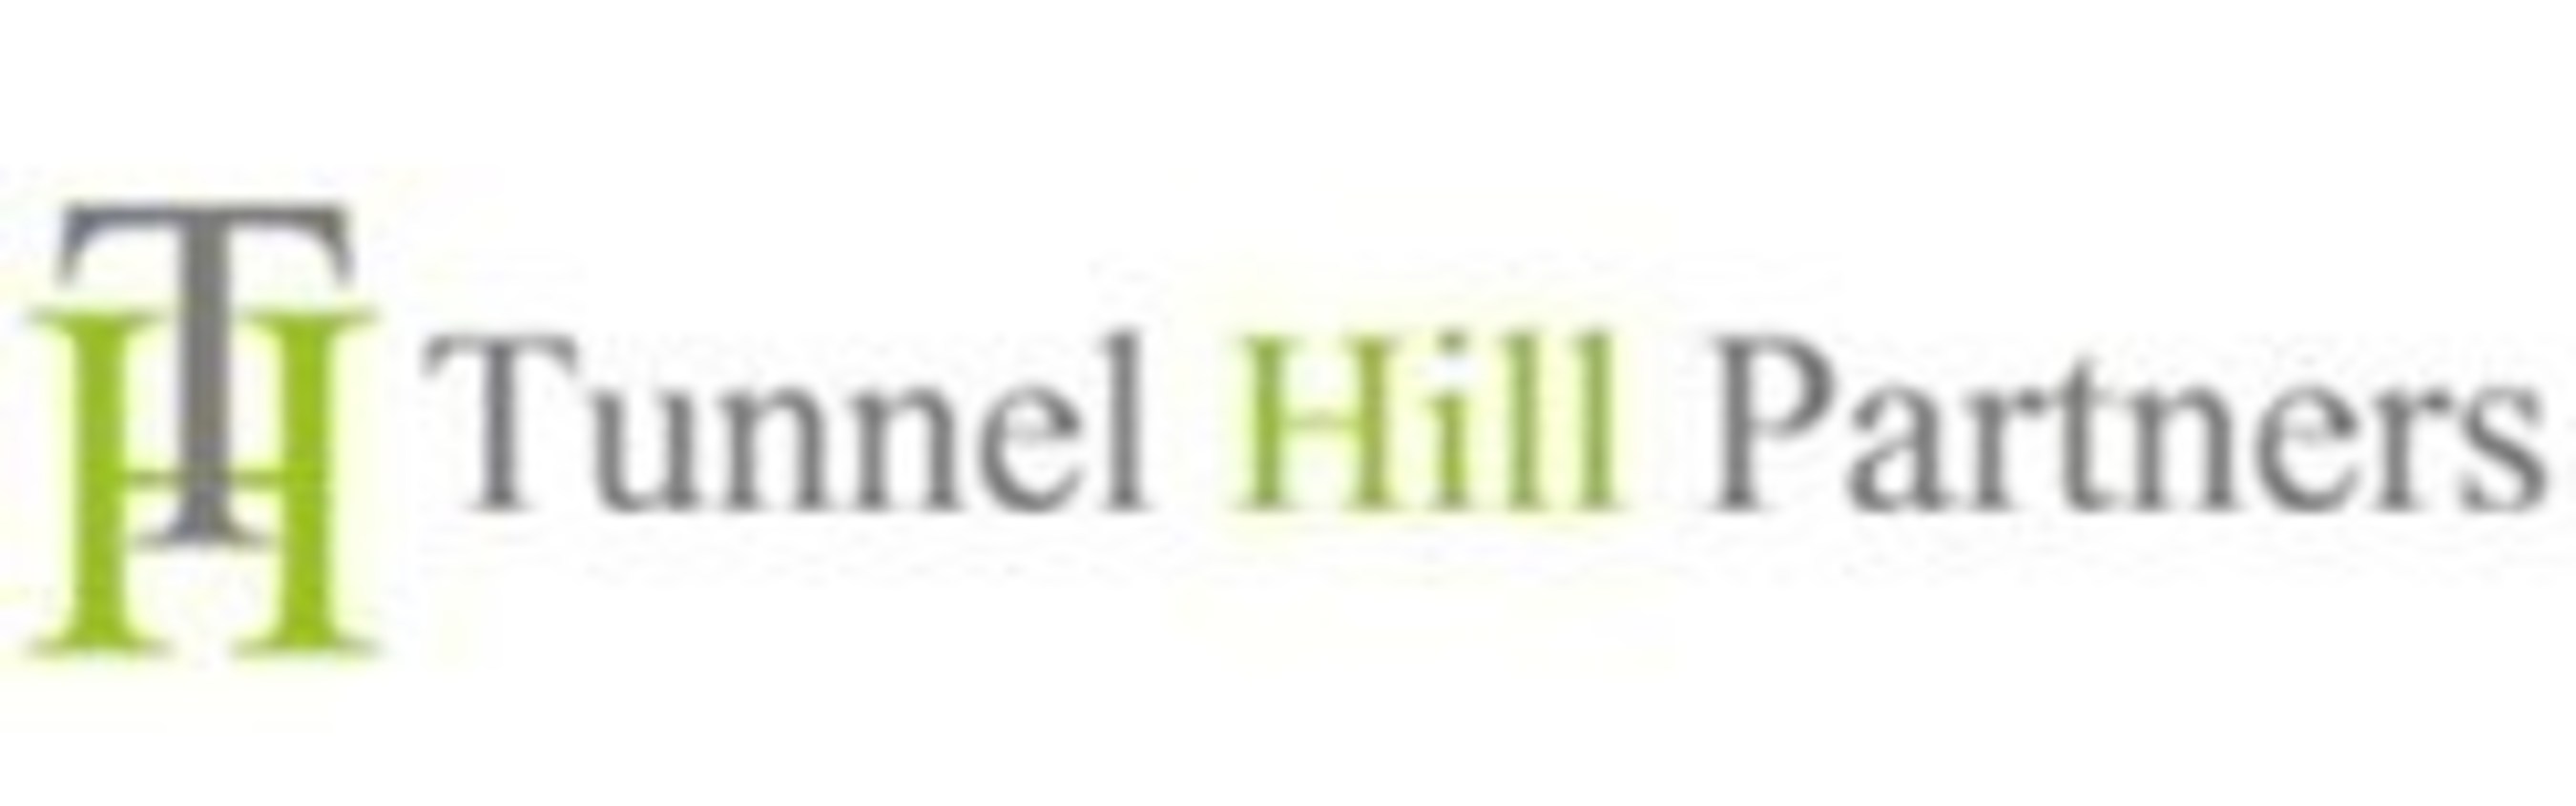 Tunnel Hill Partners